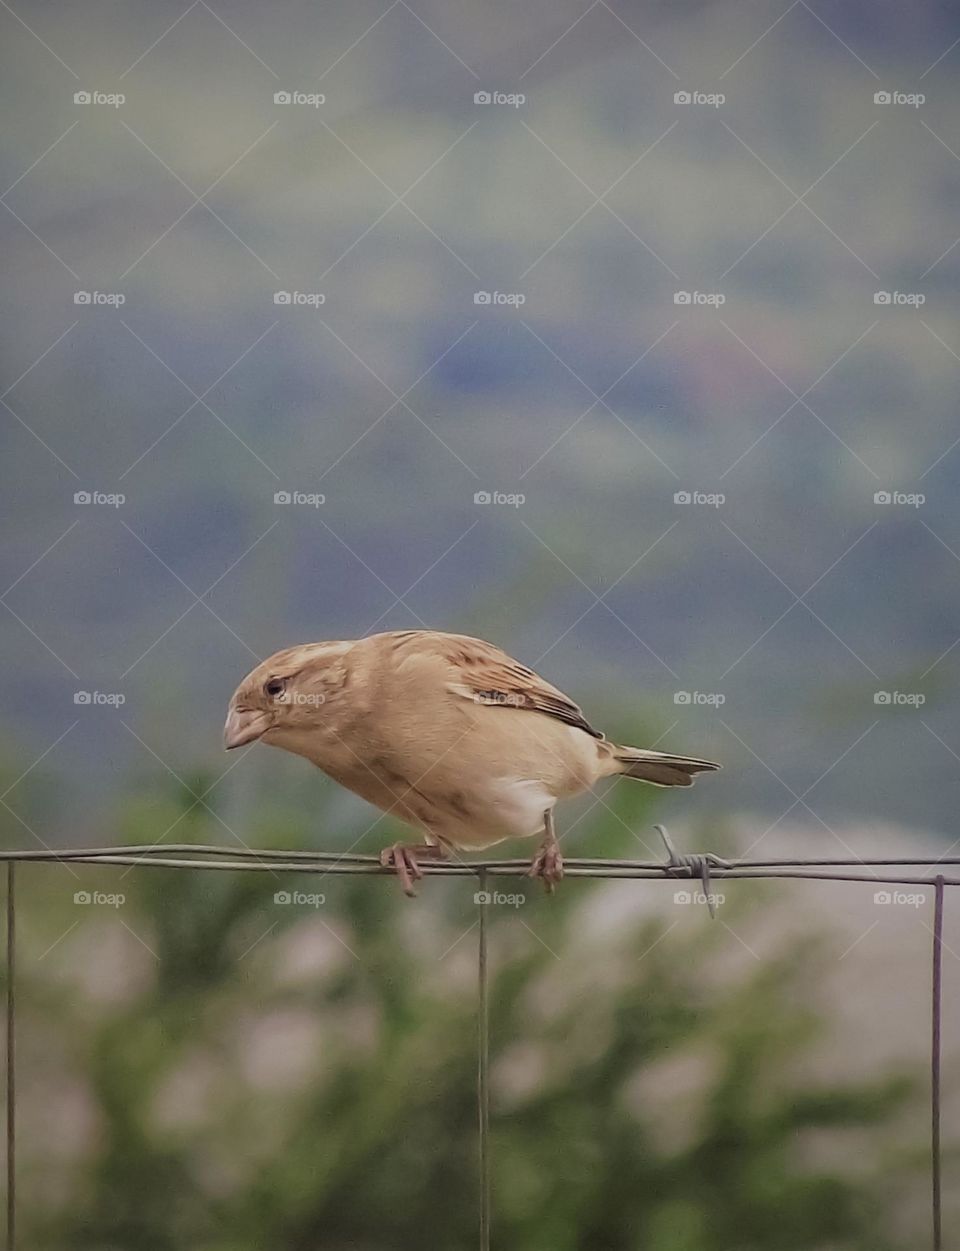 a bird standing on a wire